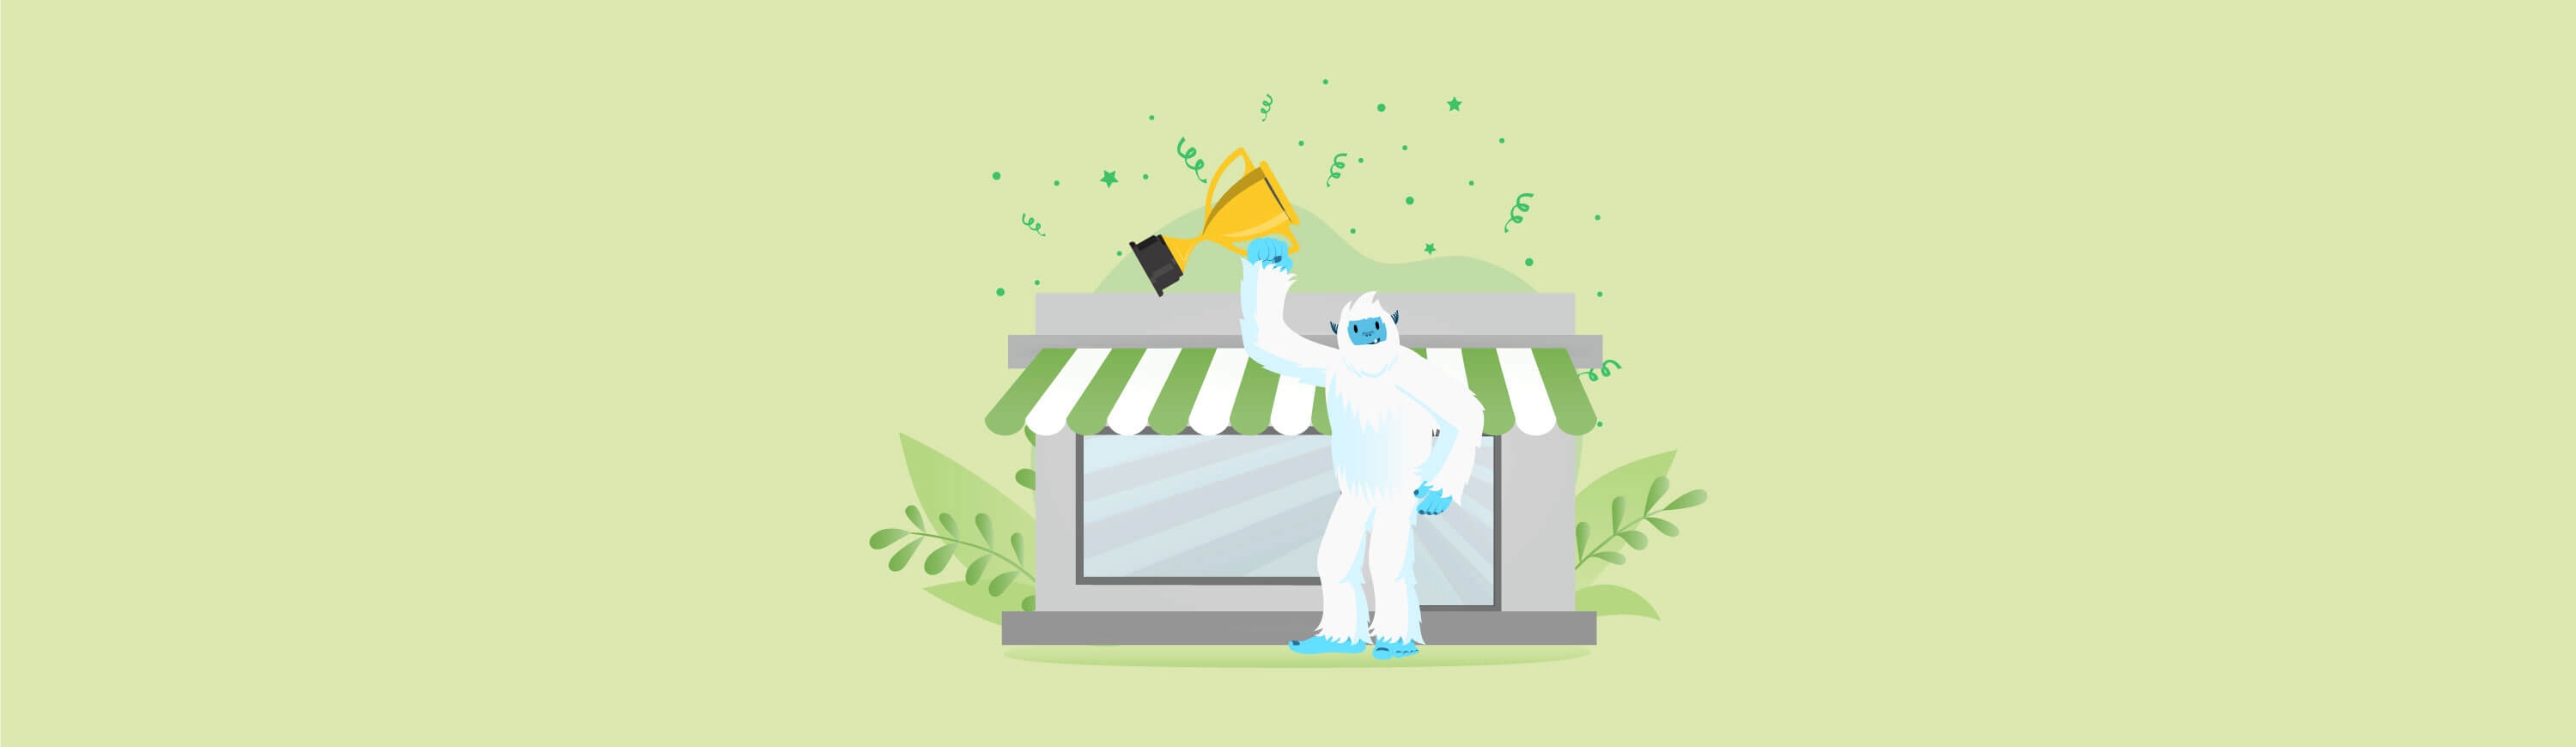 Illustration of Carl the Yeti standing outisde a small business cheering while holding a trophy.